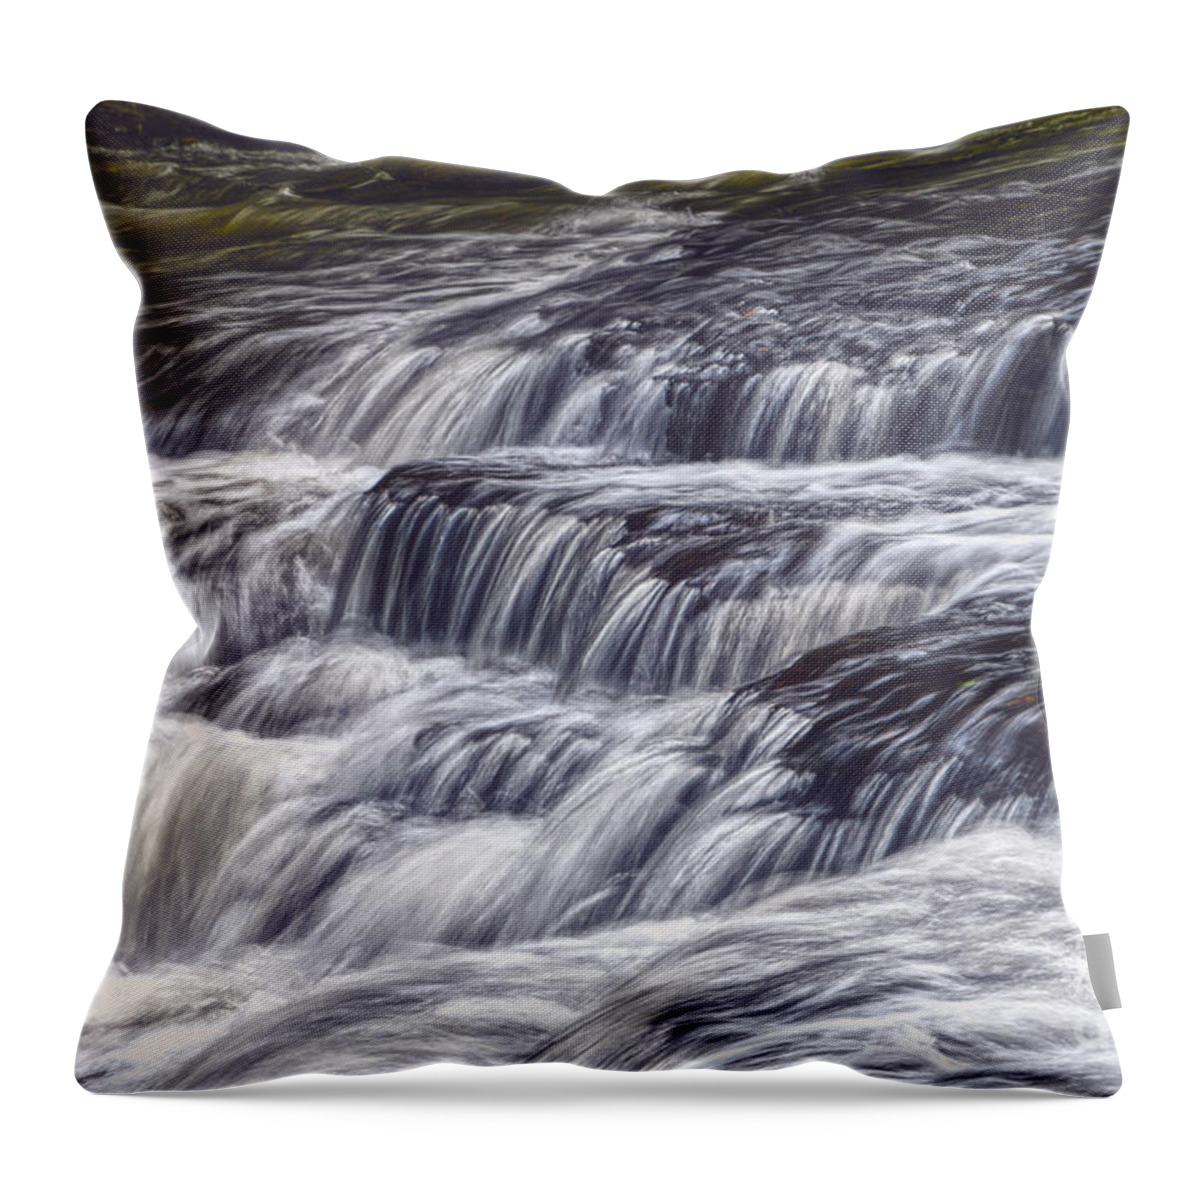 Burgess Falls Throw Pillow featuring the photograph Cascades At Burgess Falls by Phil Perkins